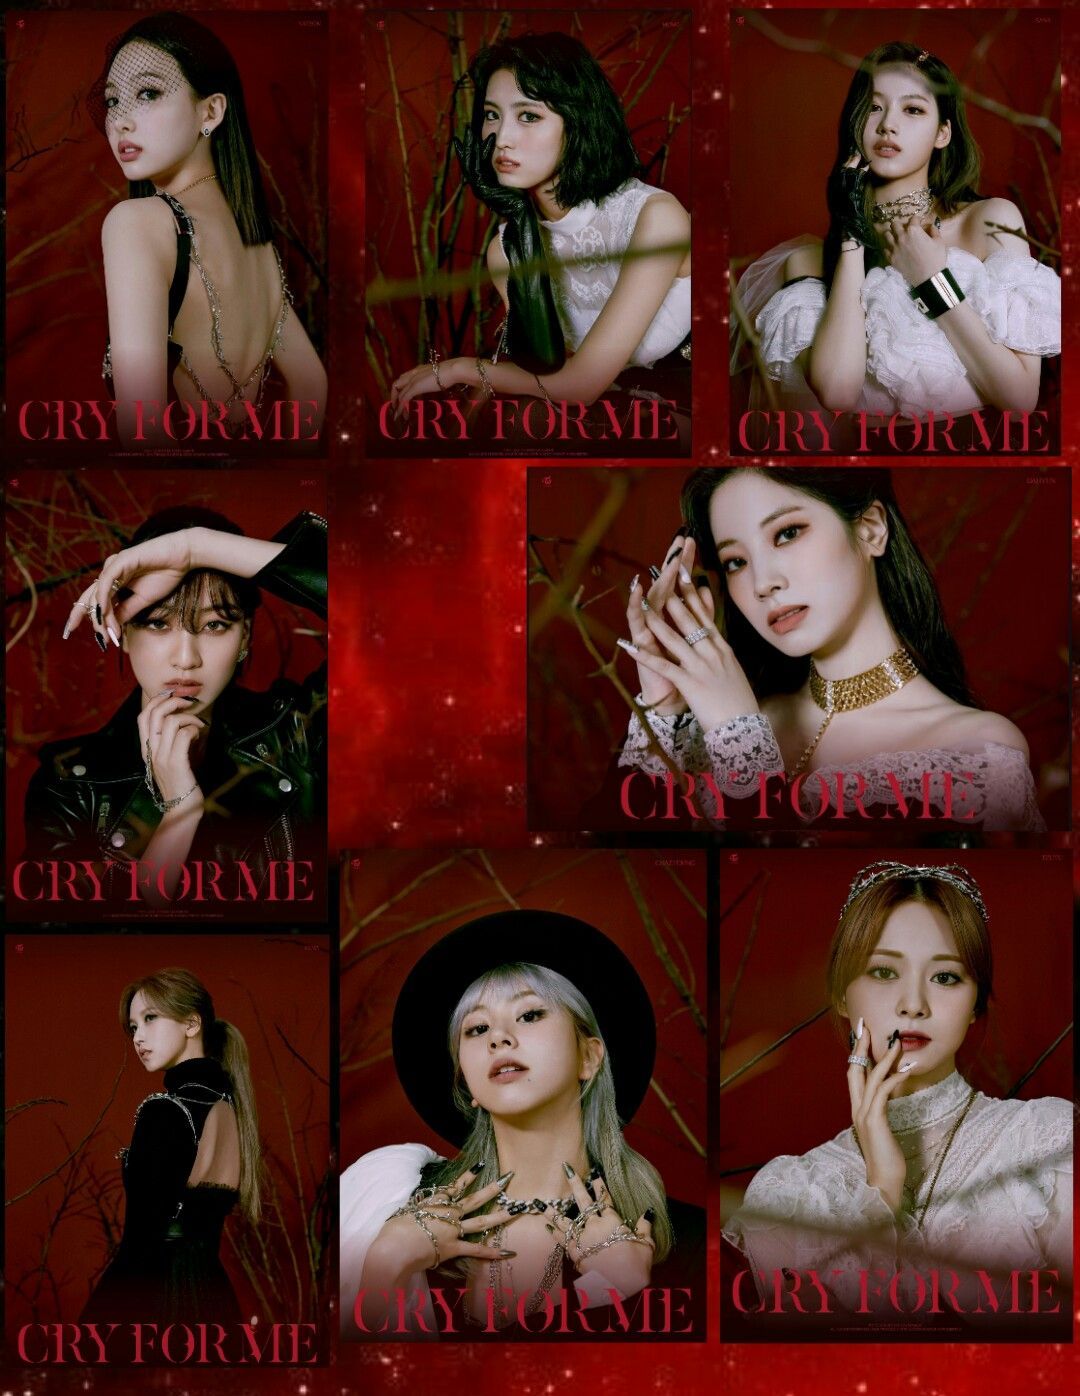 Twice Cry For Me Wallpapers Wallpaper Cave